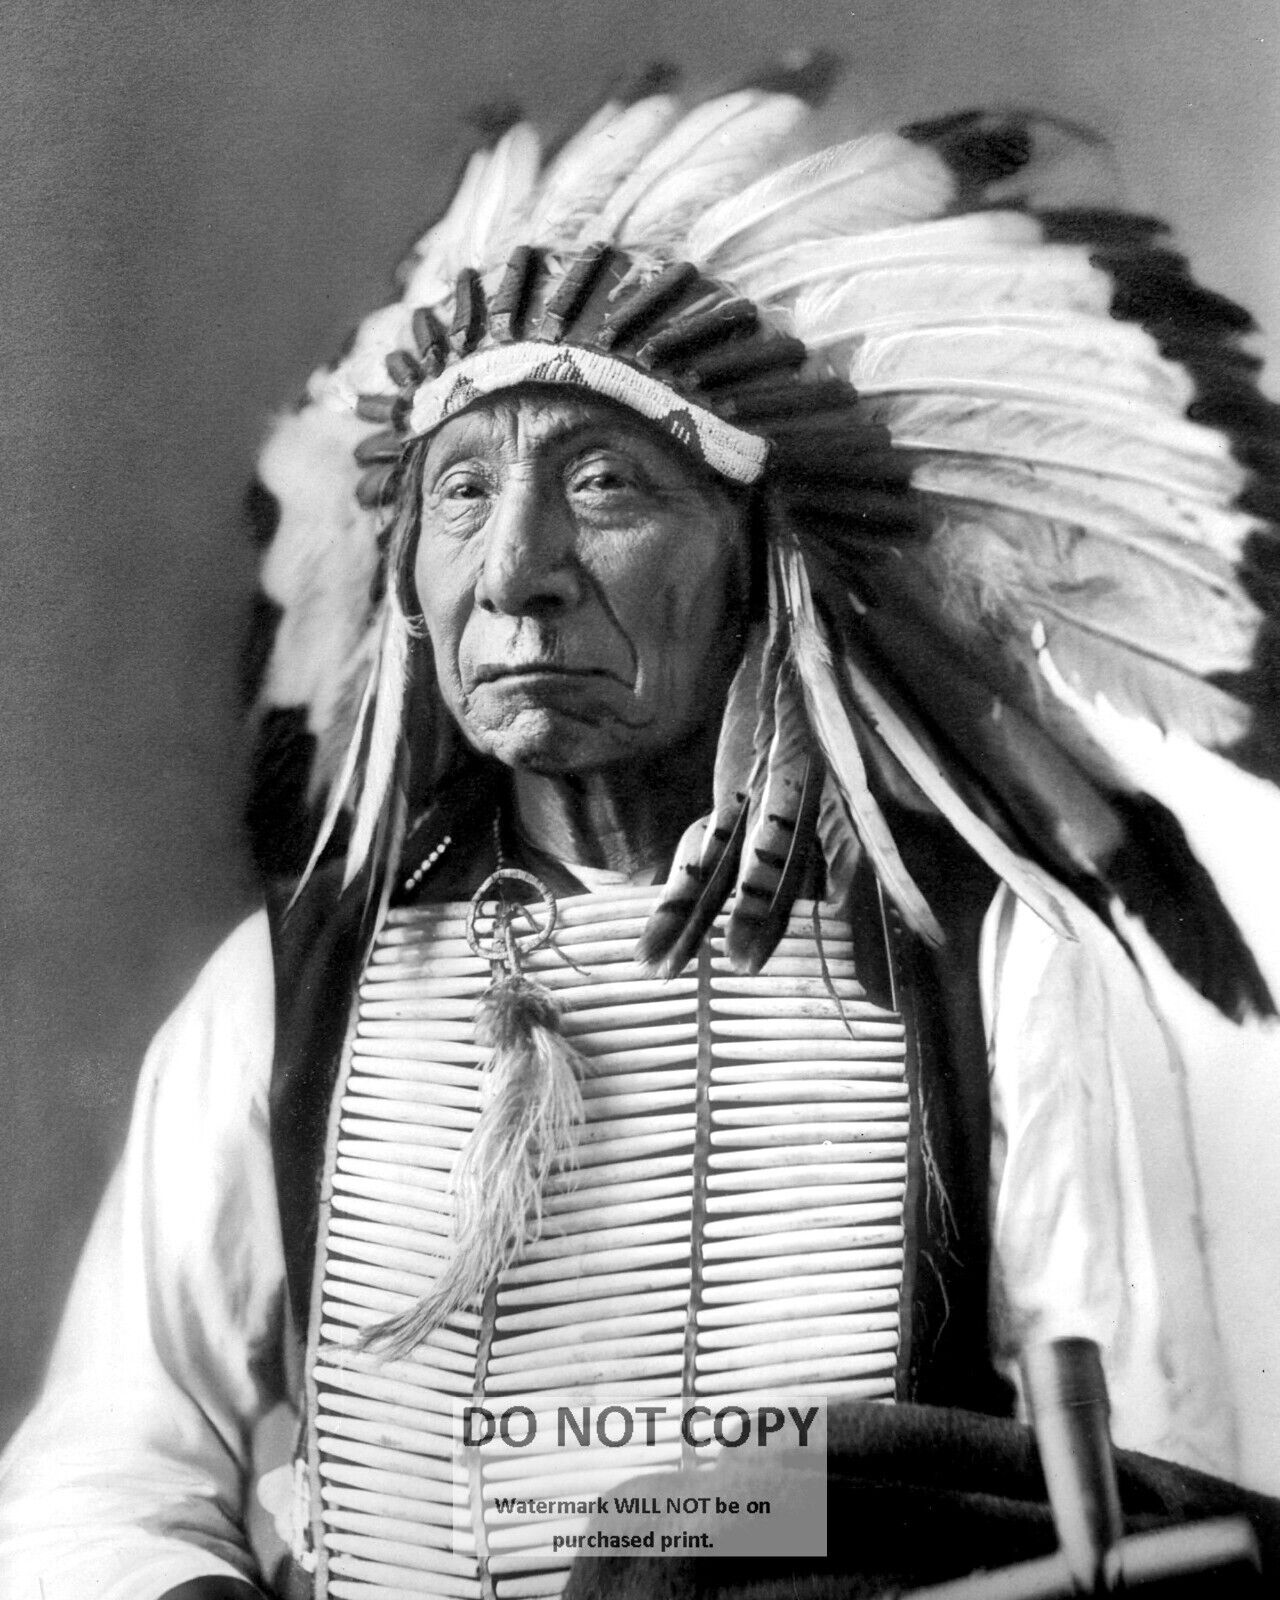 RED CLOUD OGLALA CHIEF NATIVE AMERICAN INDIAN - 8X10 PHOTO (BT937)